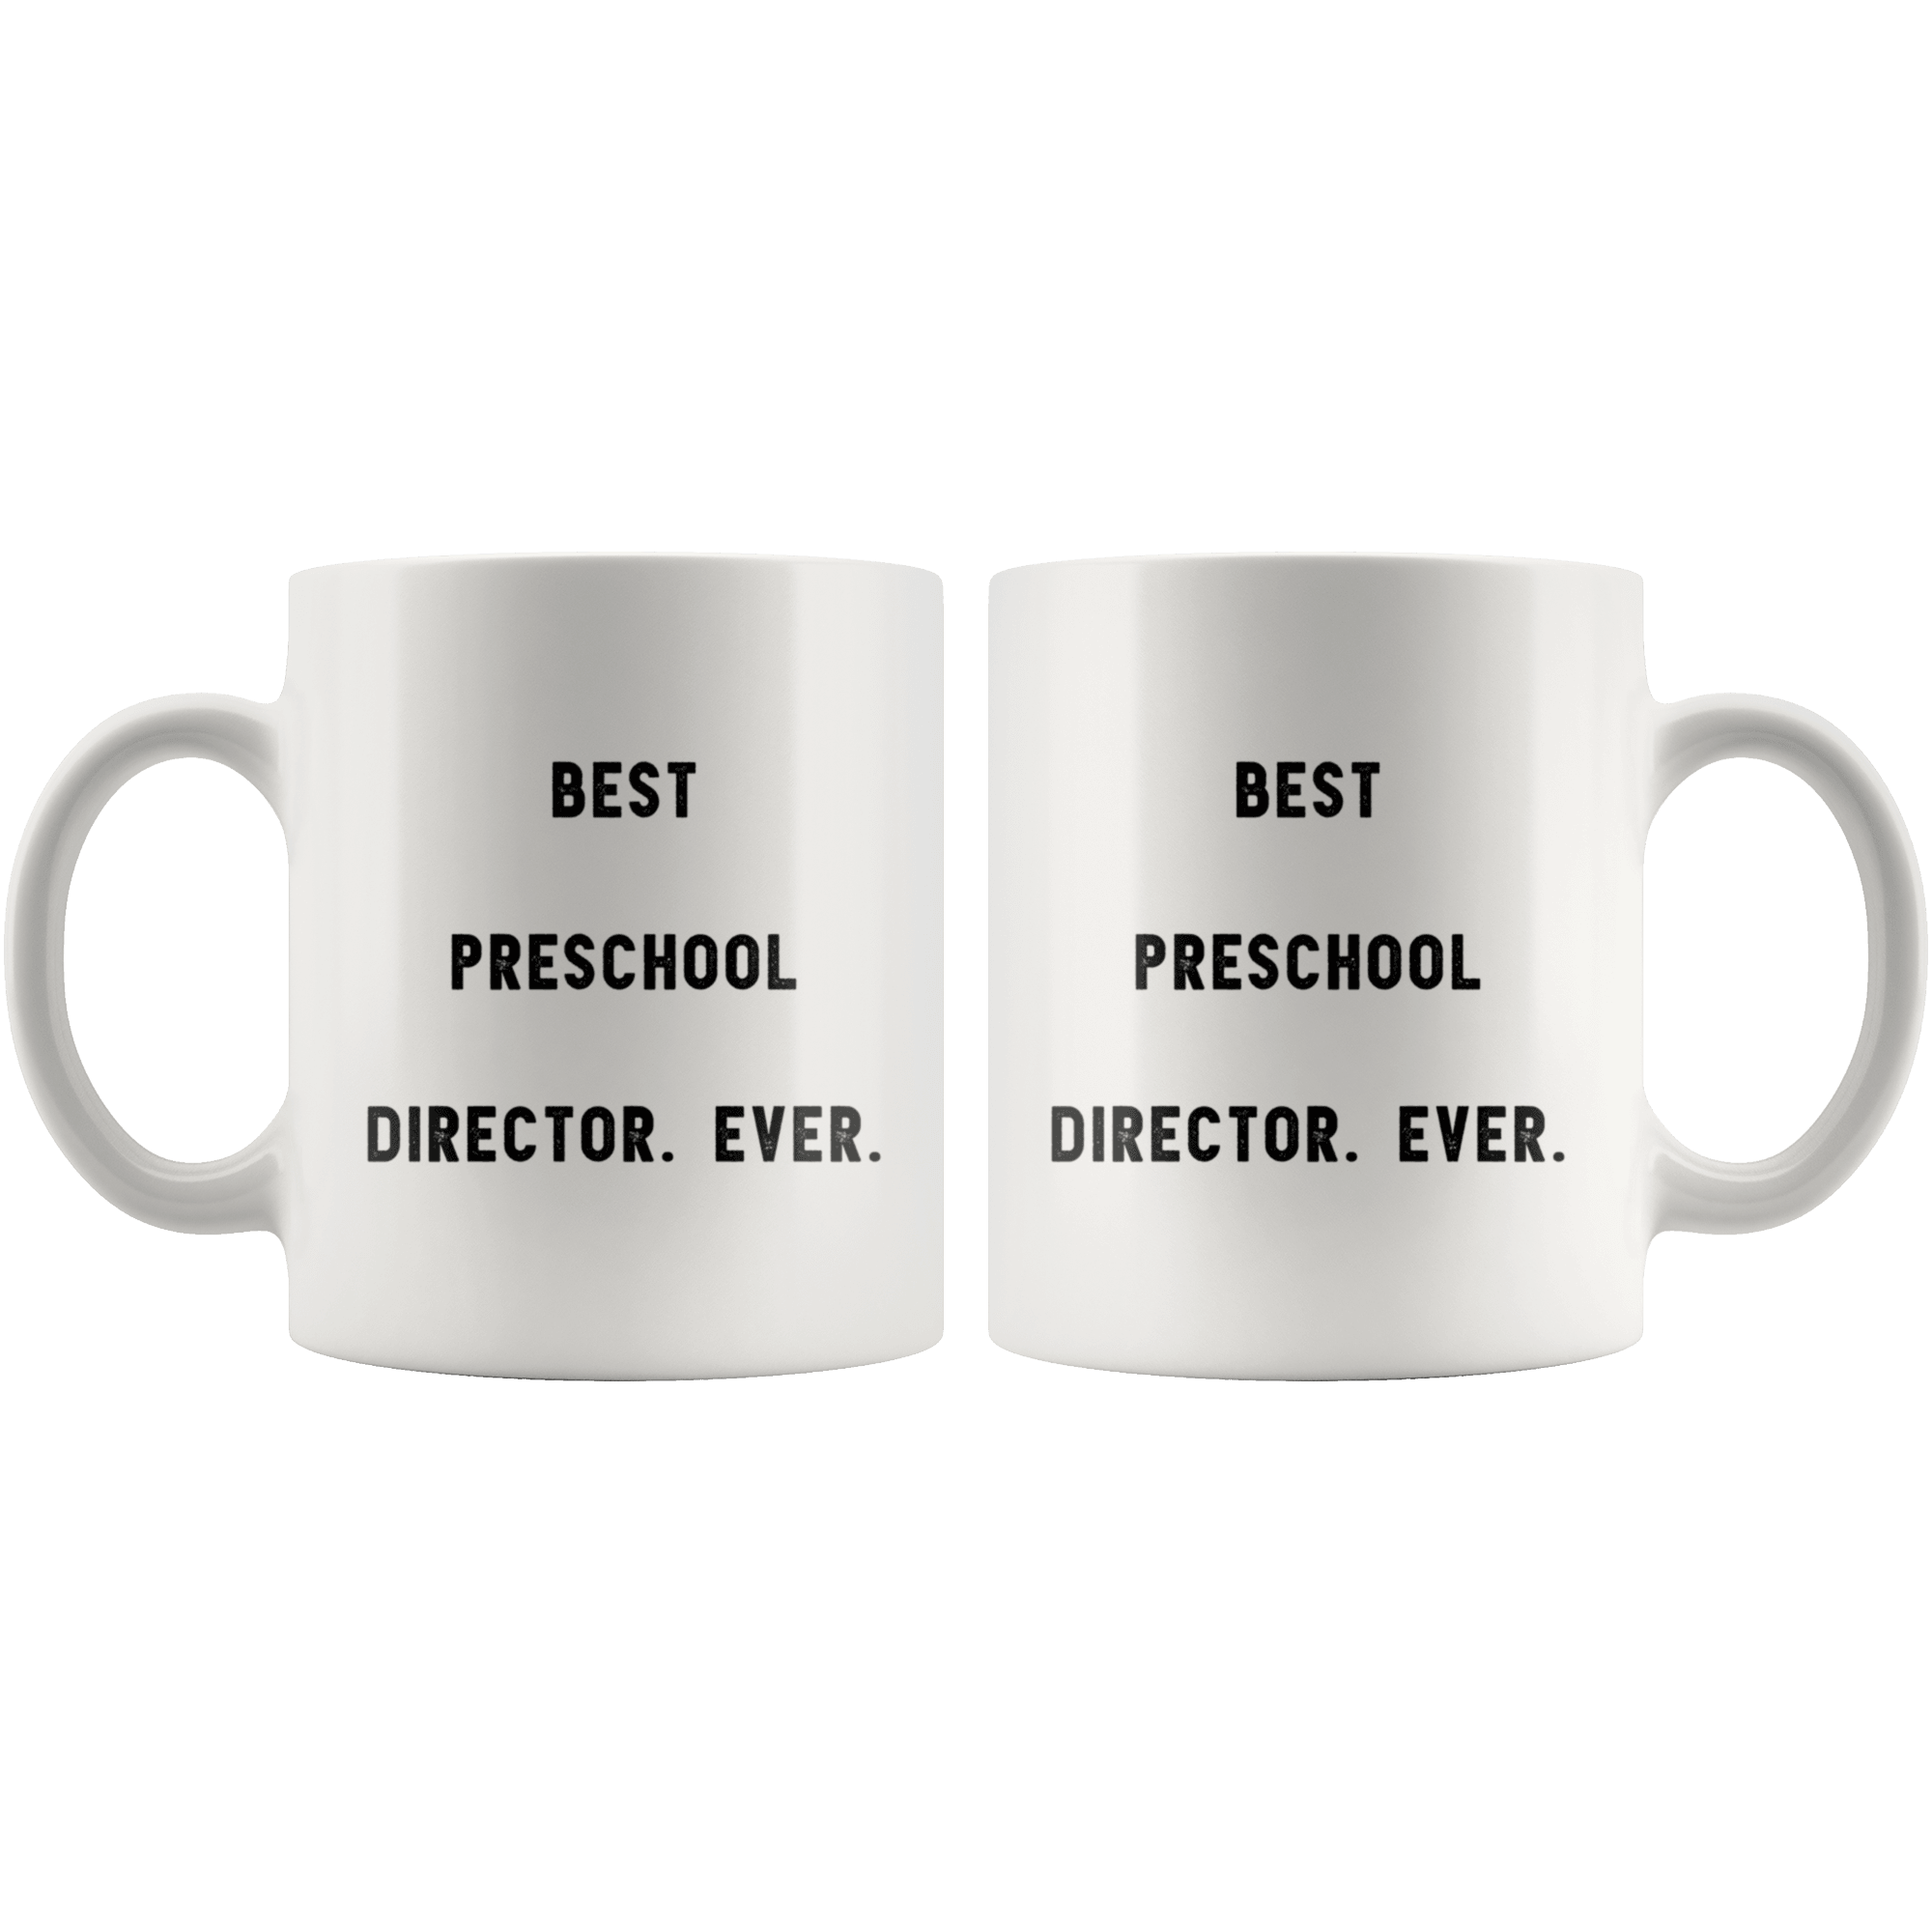 Theatre Technical Tech Director Gifts - Don't Be A Jerk Help Strike the Set  Funny Gift Ideas for Theater Tech Directors & Stage Manager